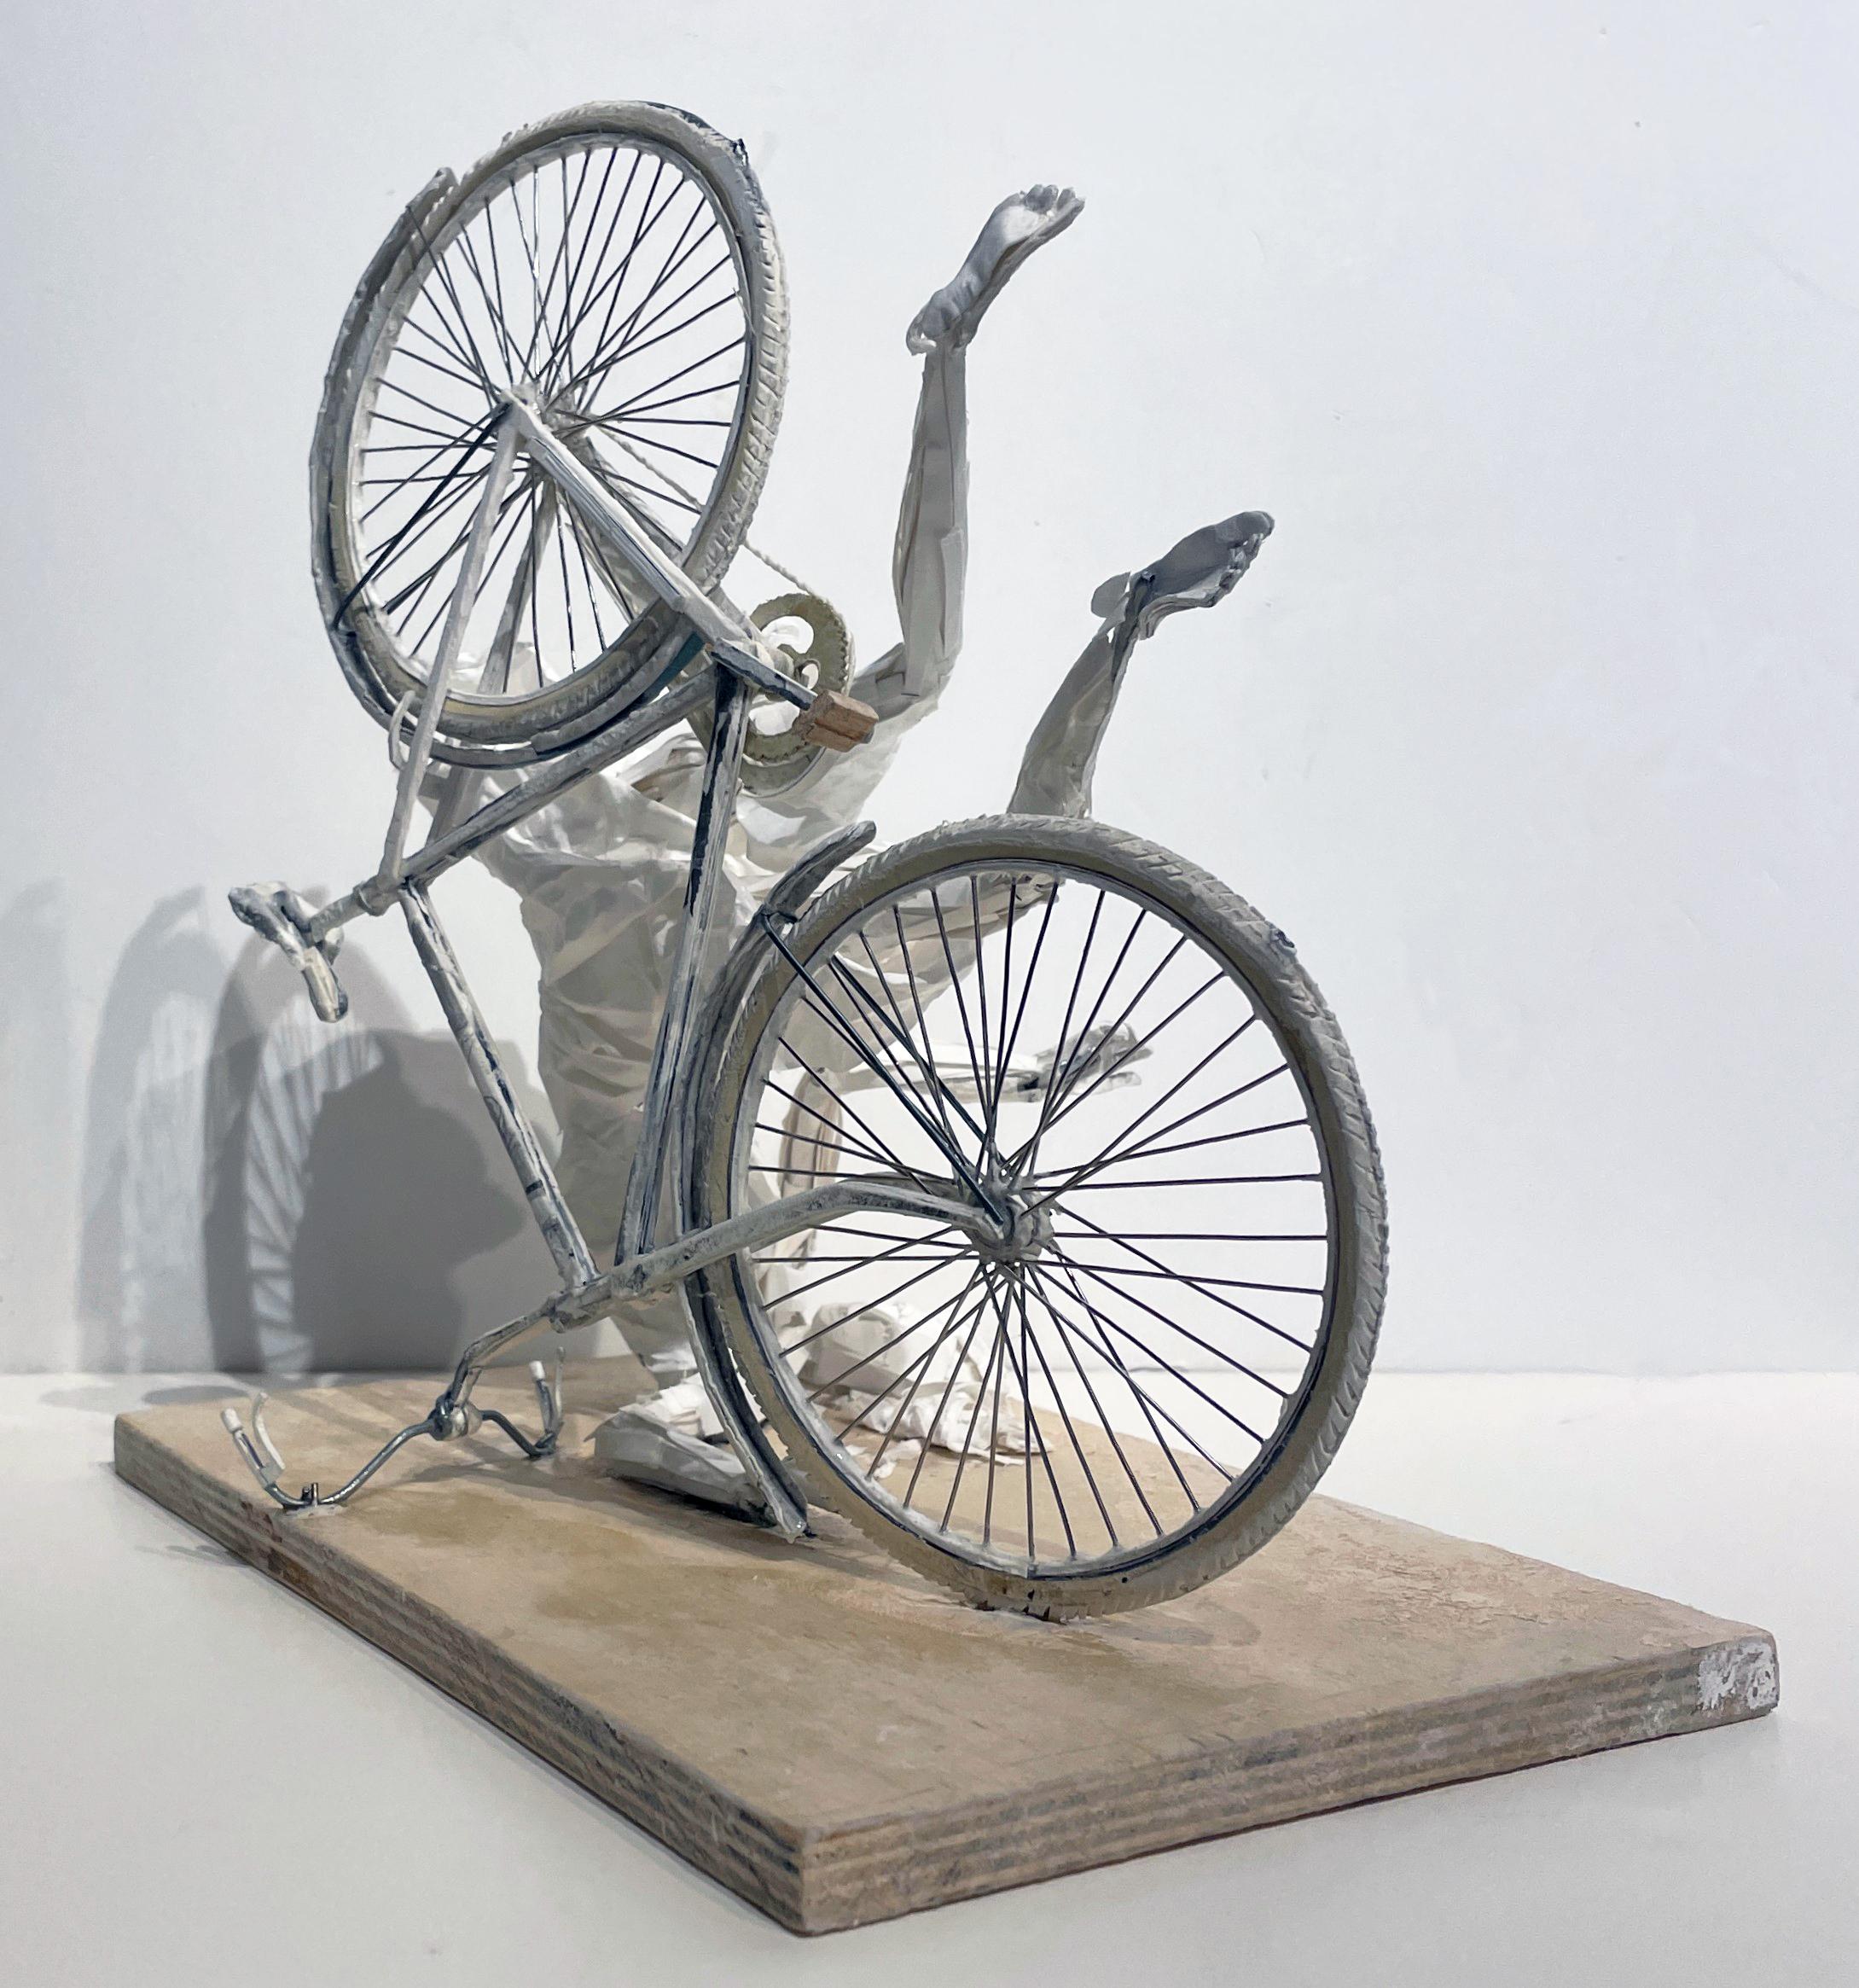 Falling Up - Highly Detailed Paper Sculpture of Woman Falling Off a Bicycle - Gray Figurative Sculpture by Ivan Markovic